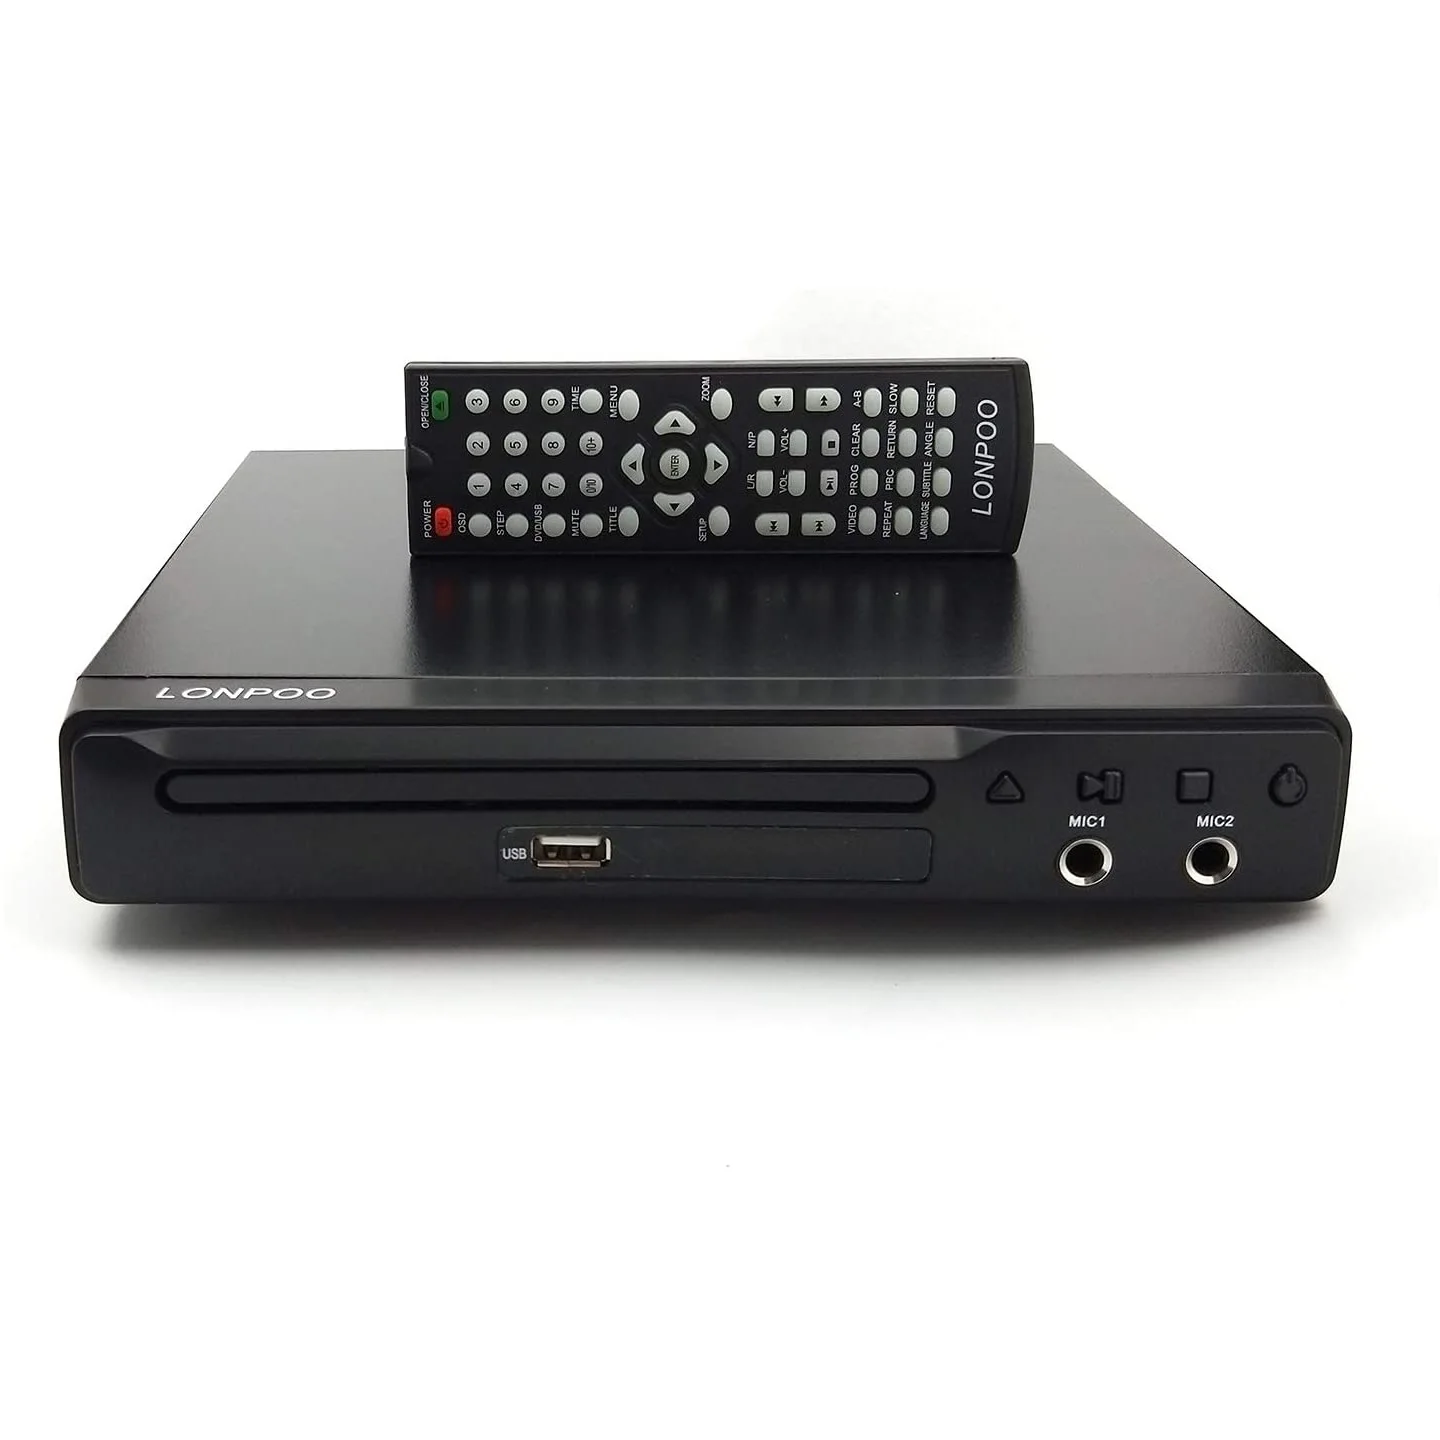 Lonpoo Home Region Free Hd Dvd Player Cd Player With Karaoke Jack - Buy Dvd Player,Dvd Player Home,Home Dvd Player Product on Alibaba.com